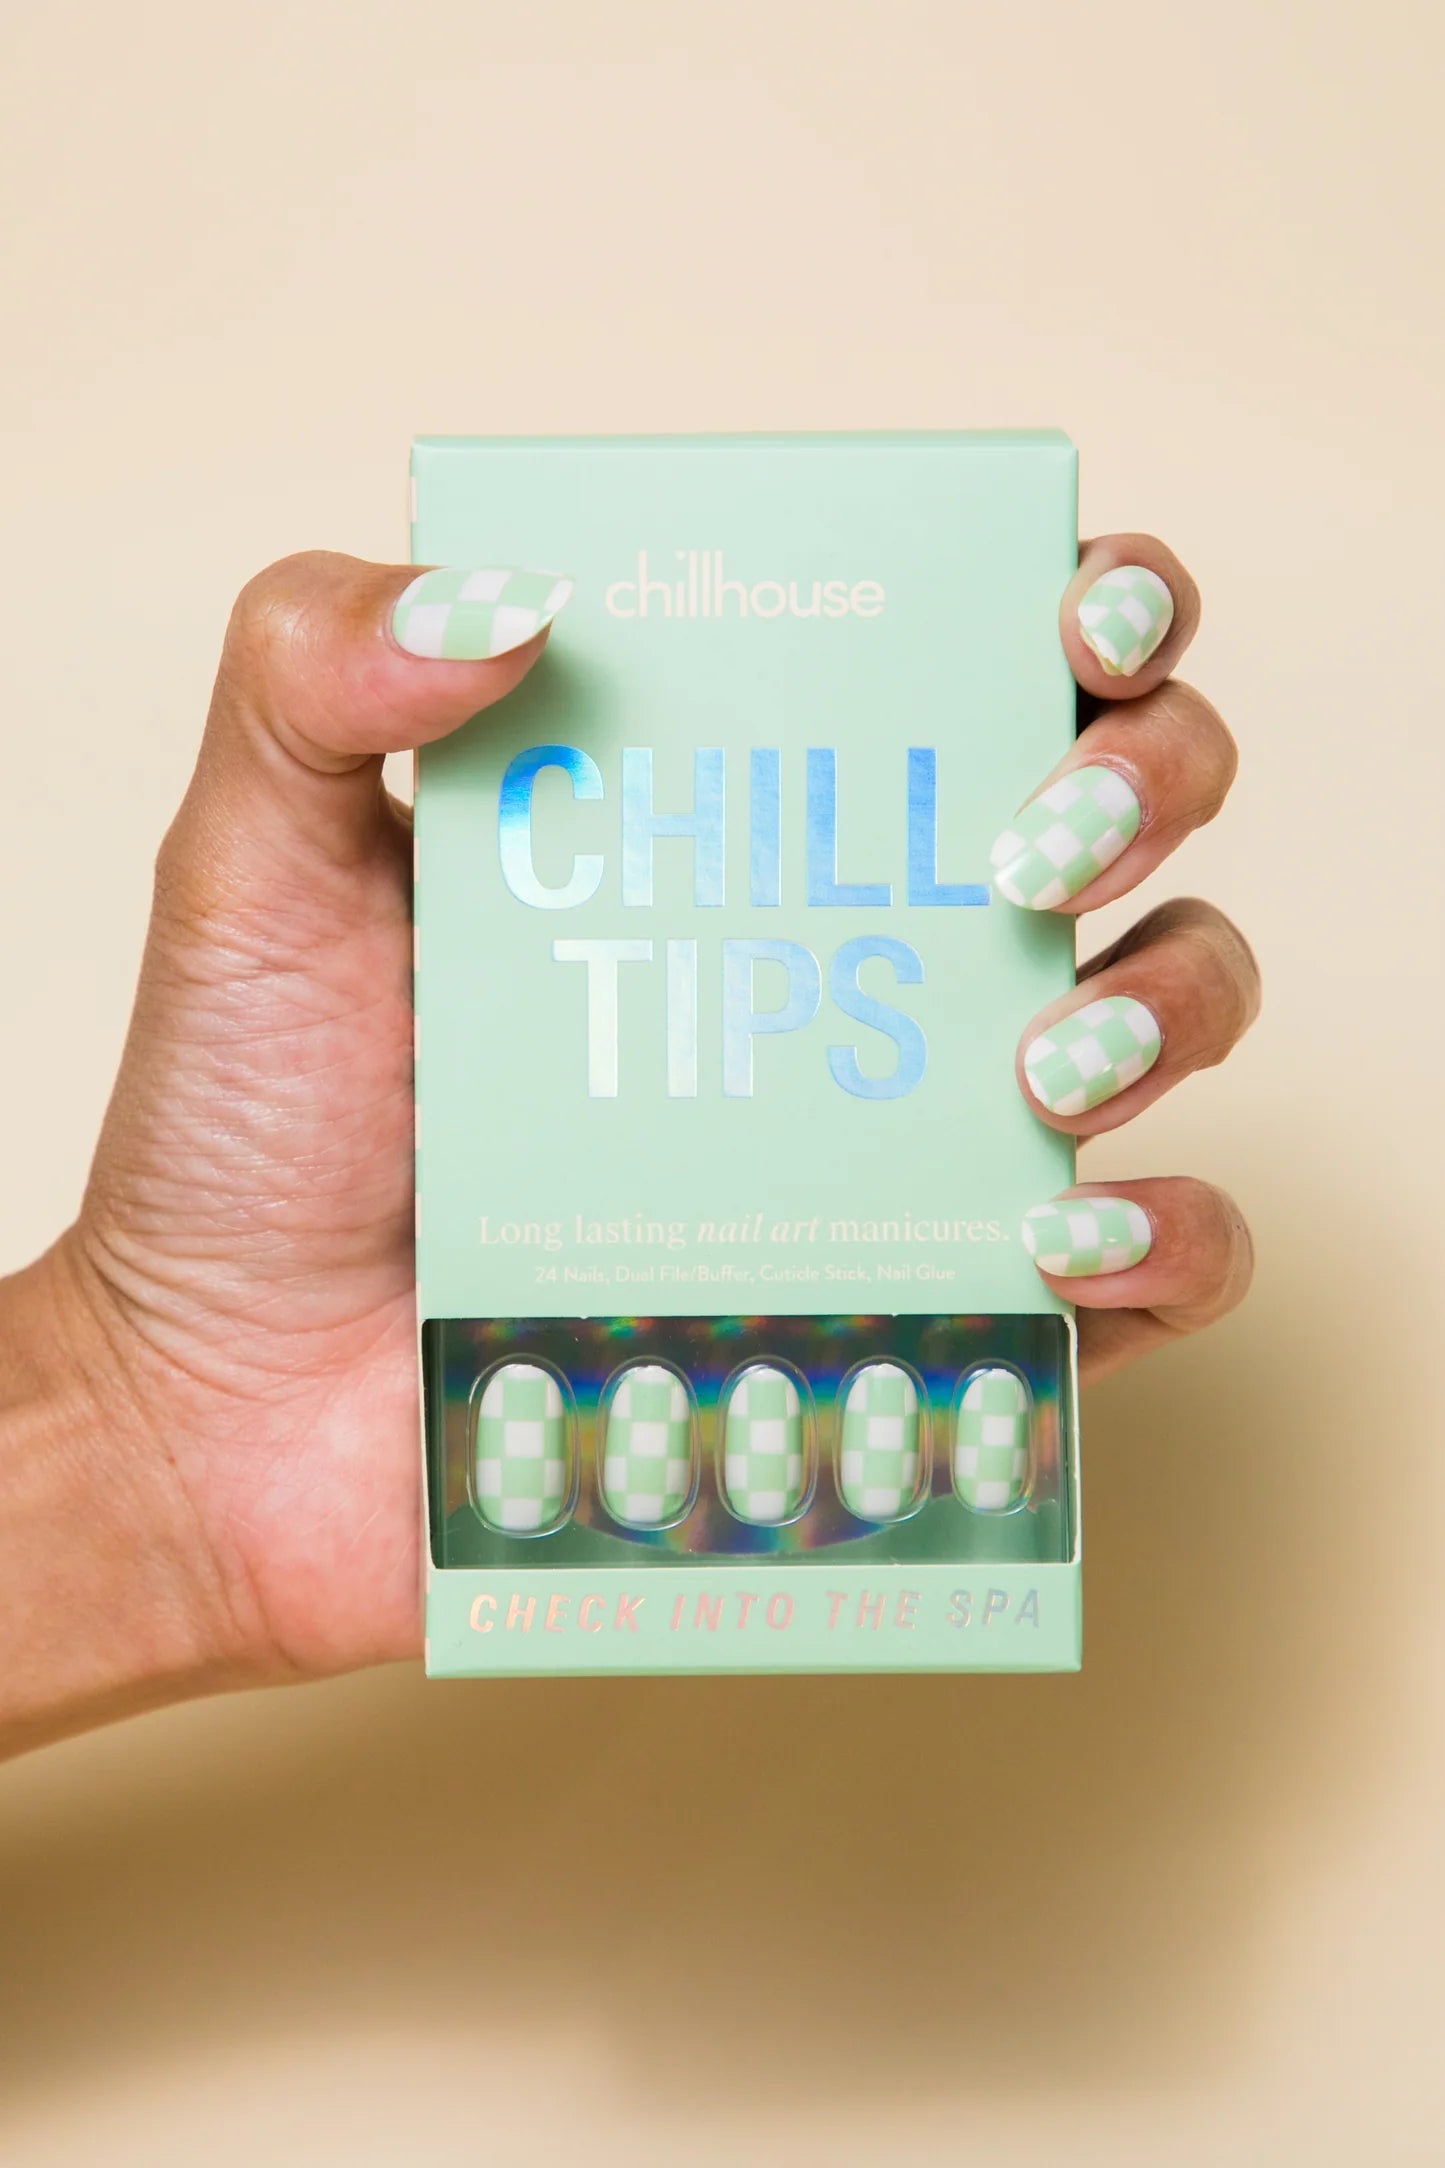 Chill Tips in Check into the Spa Chillhouse 